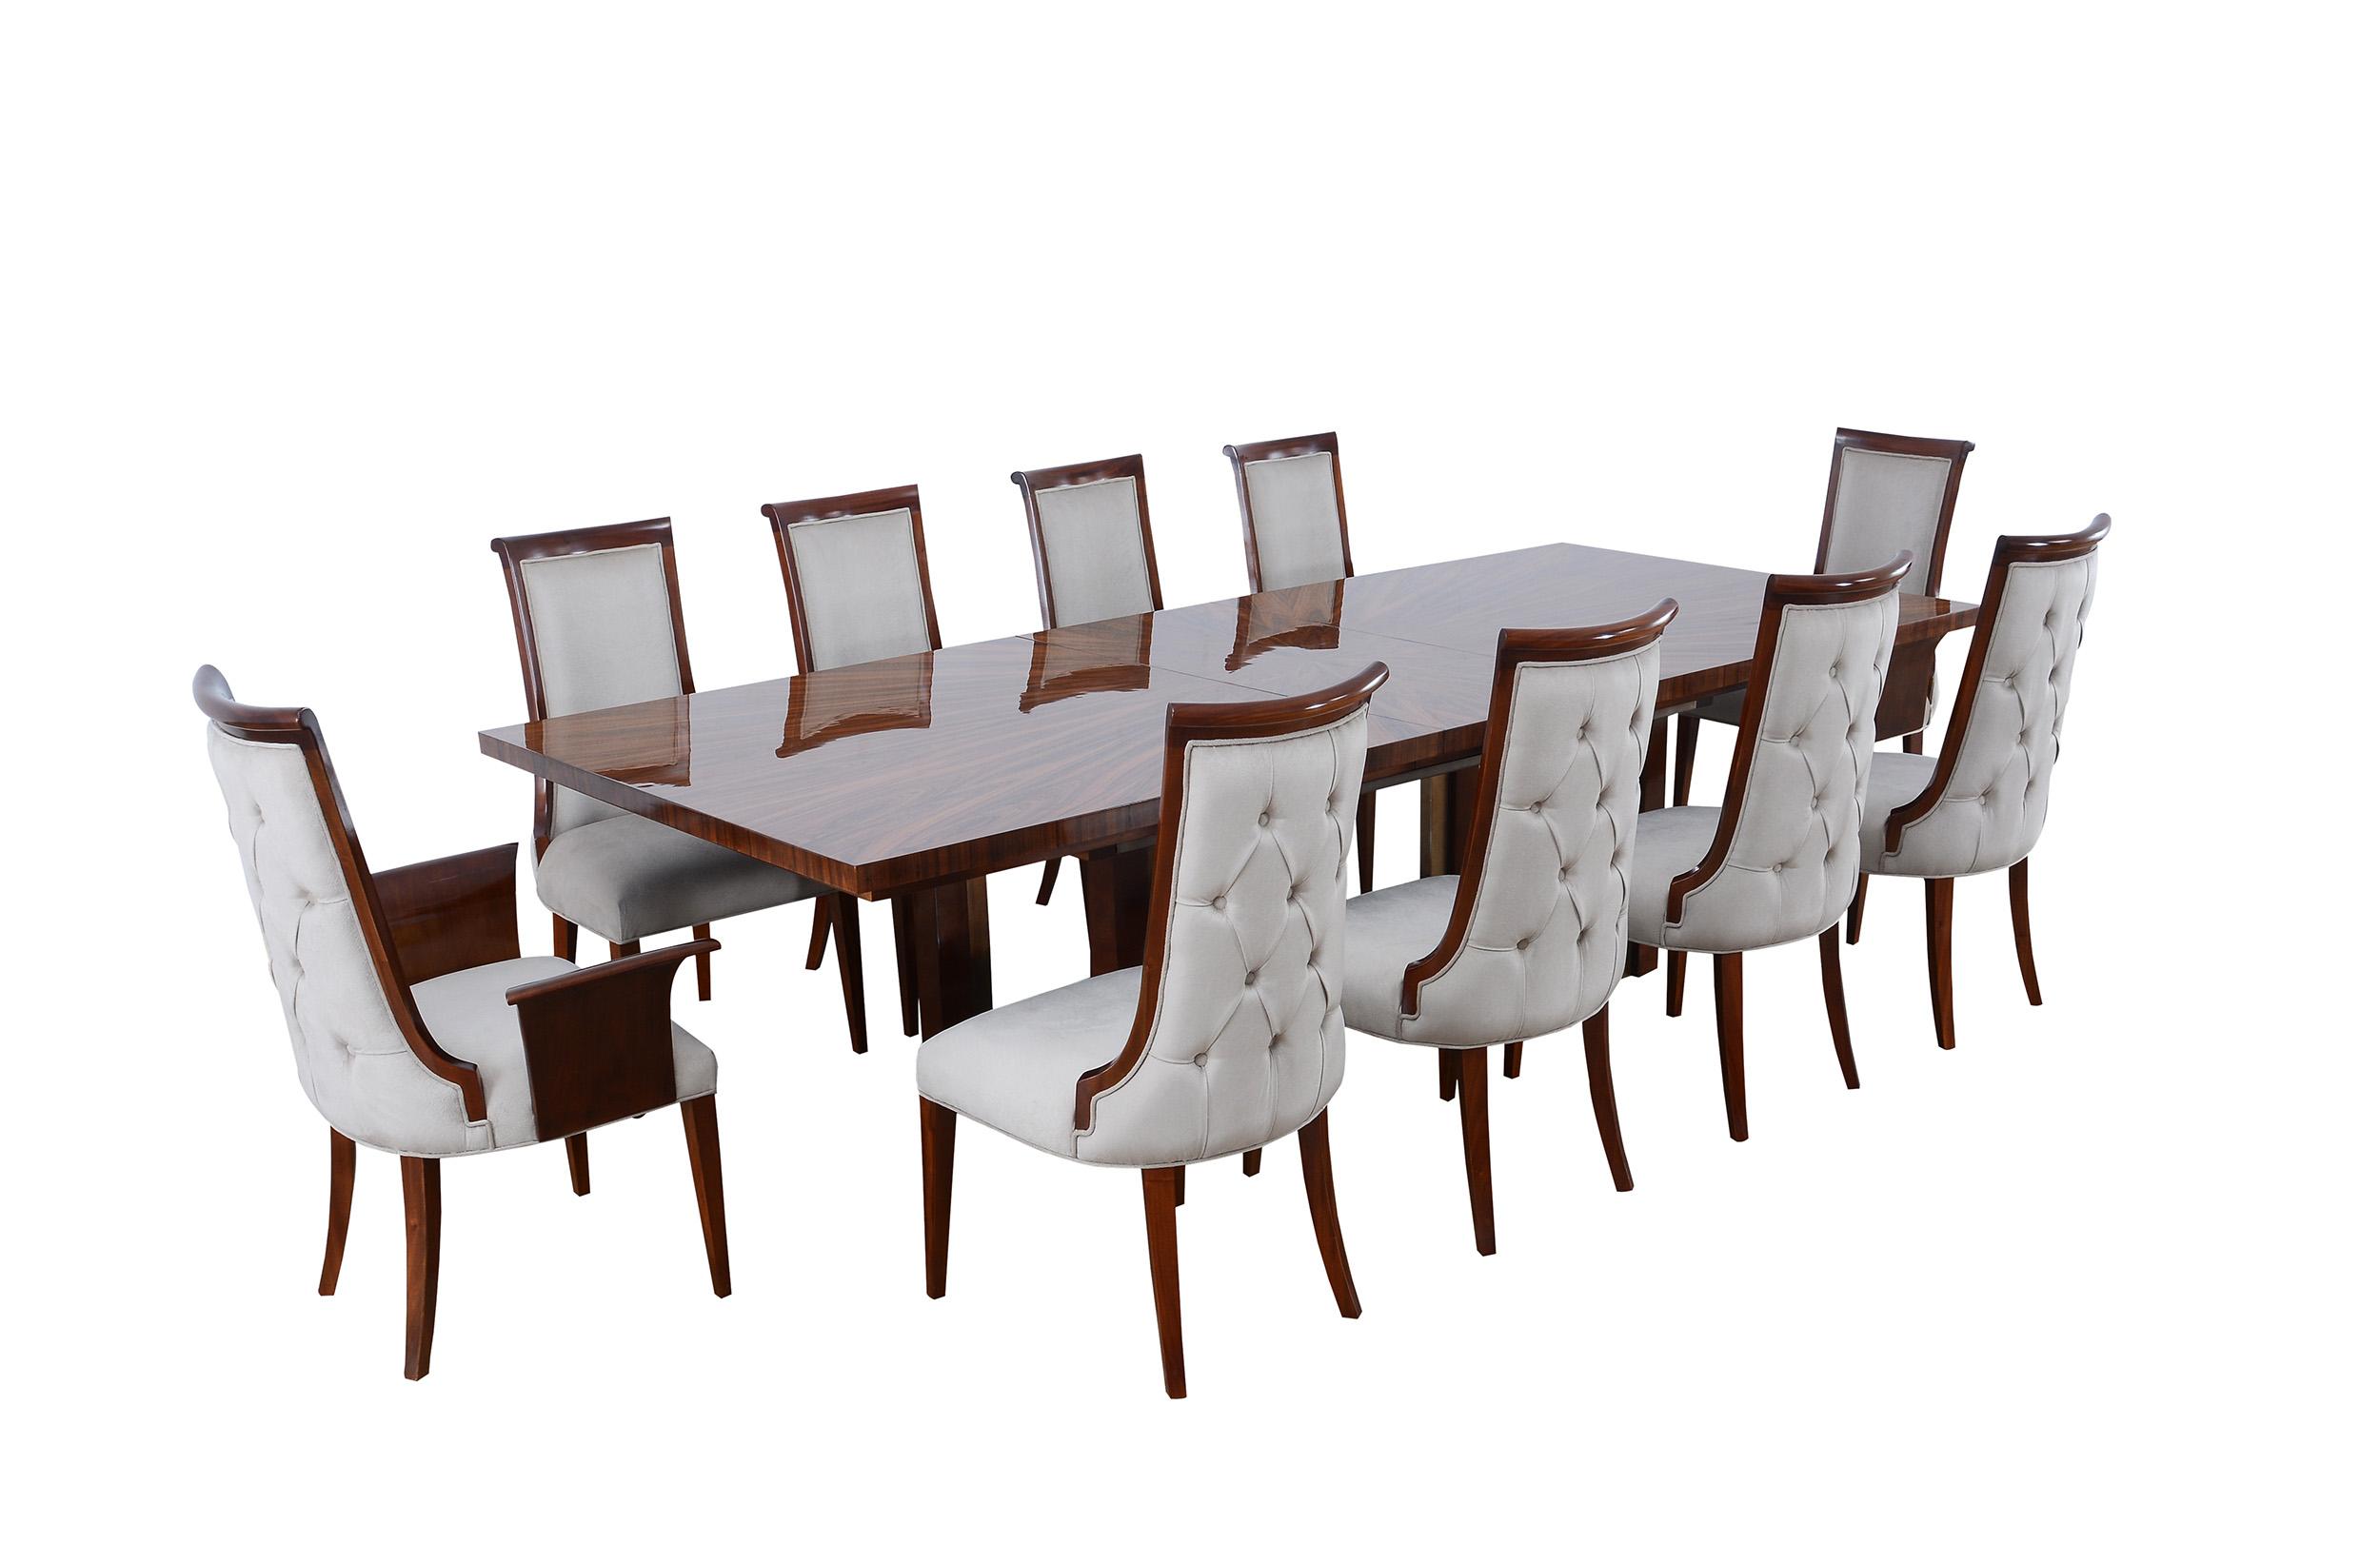 Modern Dining Table Set GLAMOUR 56015-DT-Set-11 in Mocha Fabric